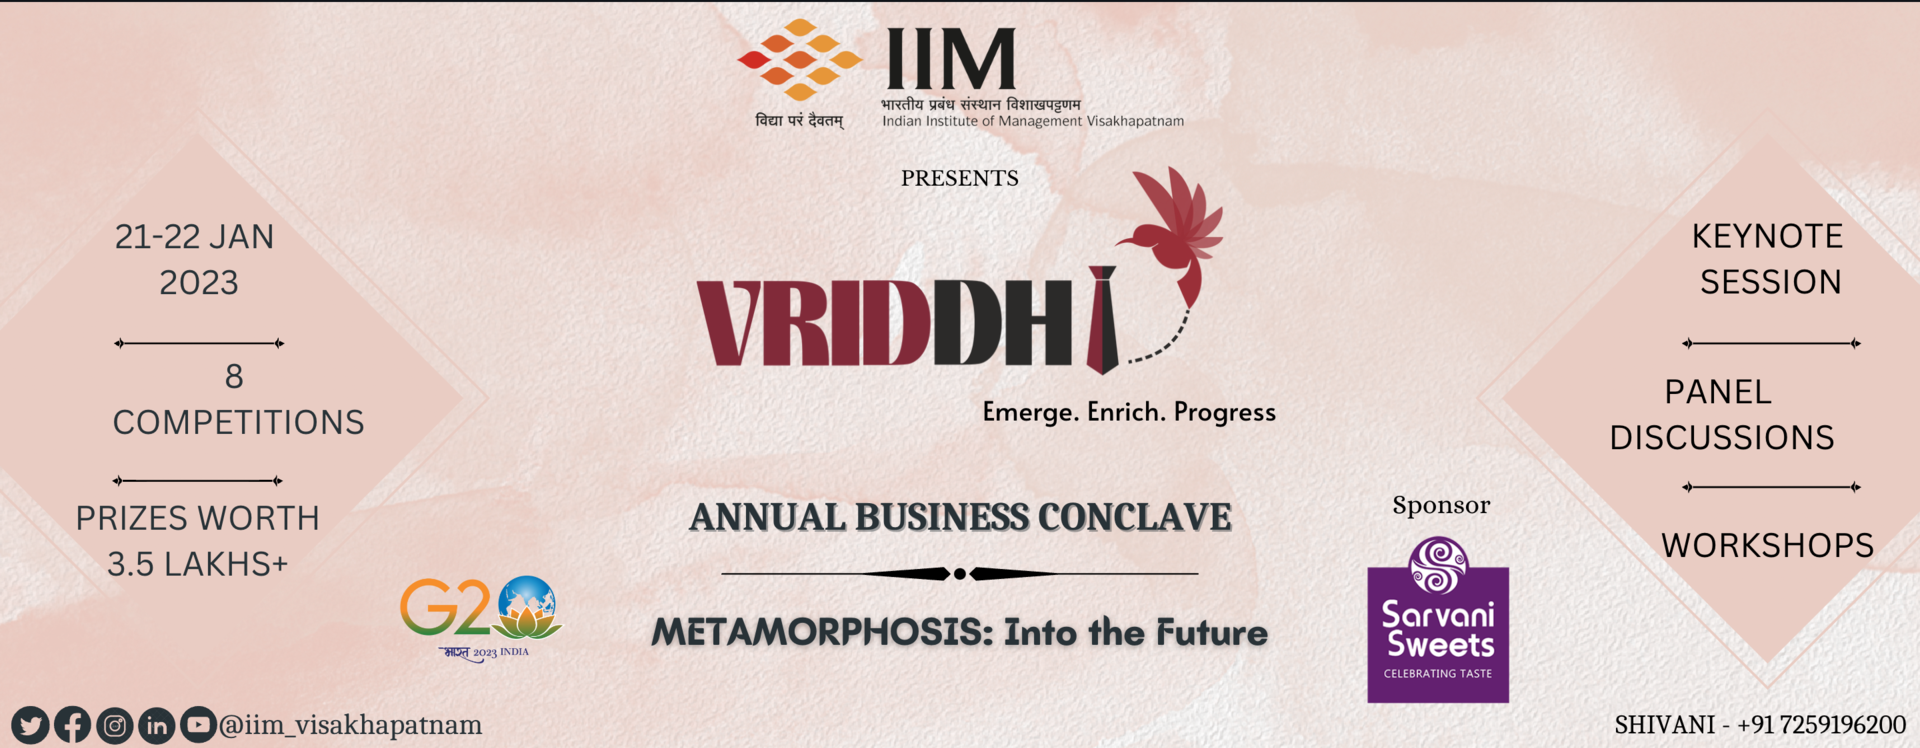 Vriddhi 4.0 – Annual Business Conclave on January 21st & 22nd 2023